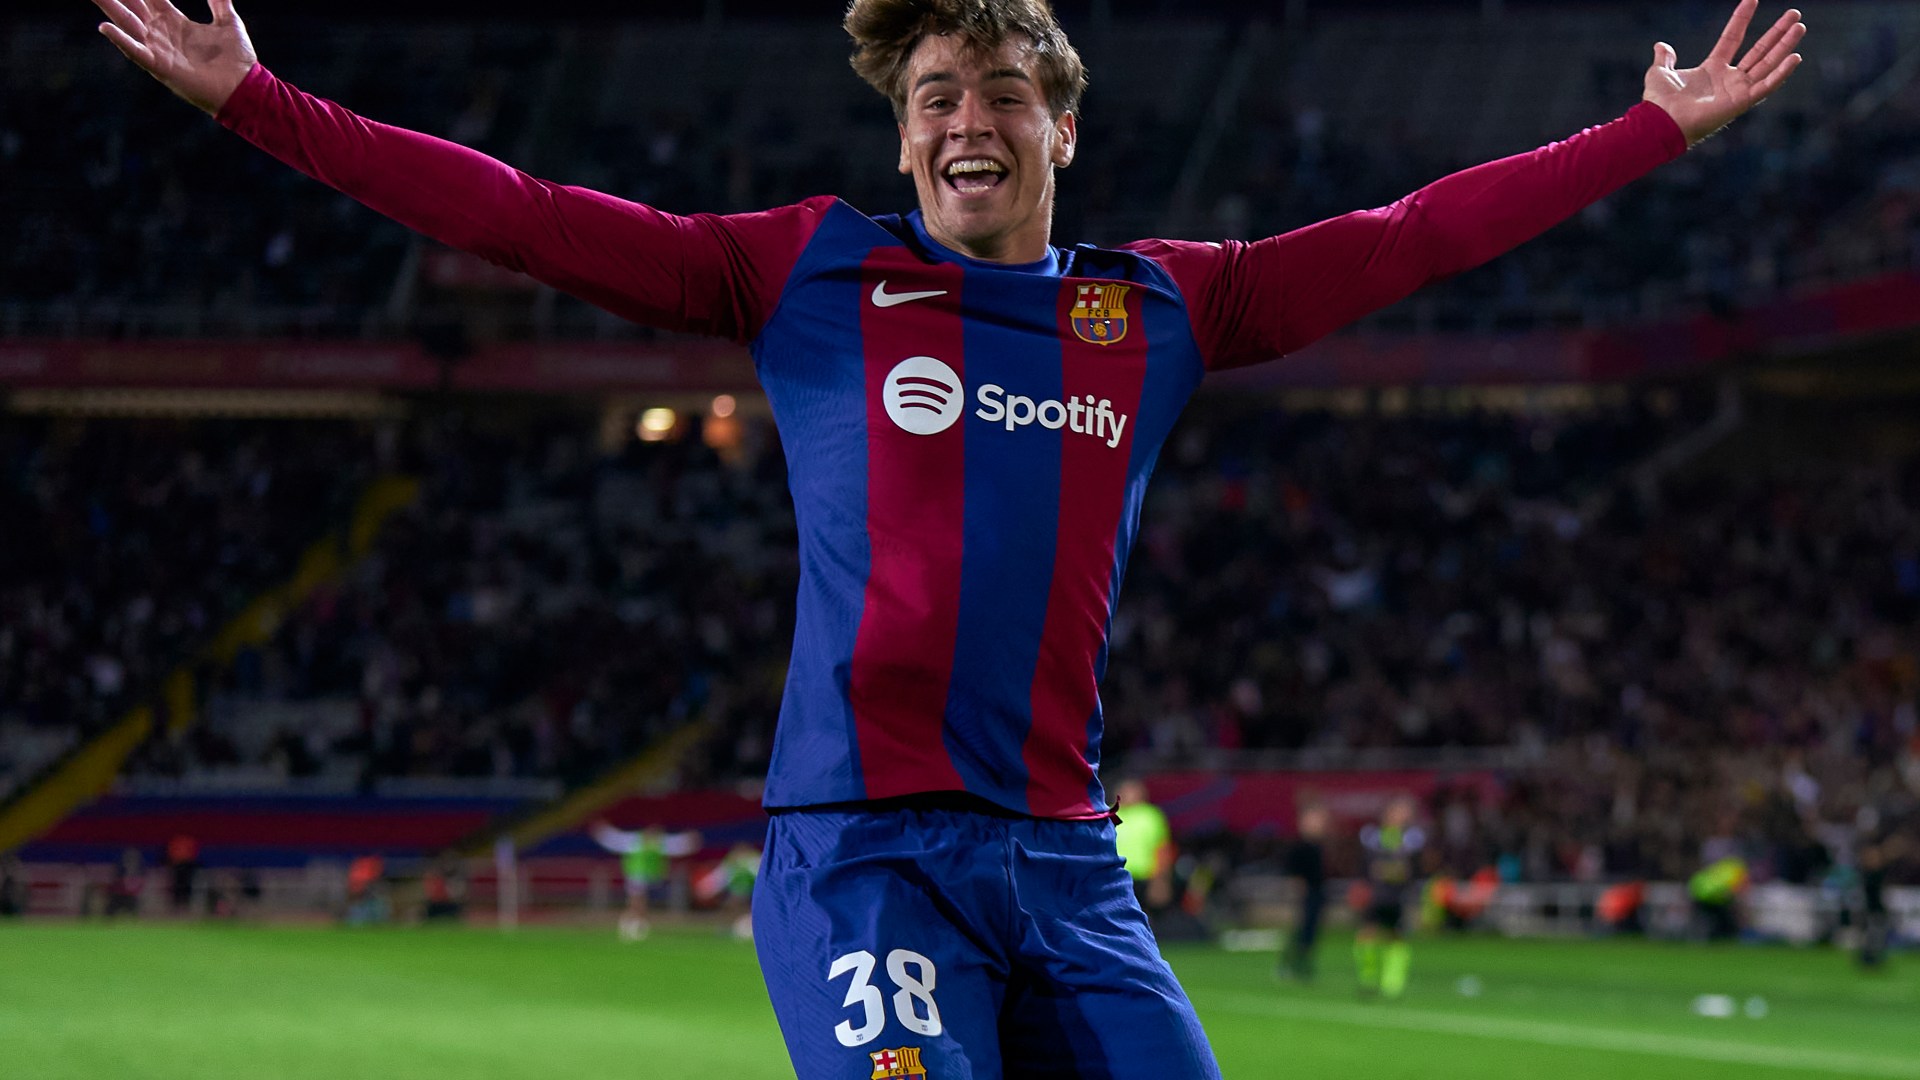 Barcelona academy graduate mobbed by teammates after winning goal 23 seconds into senior debut